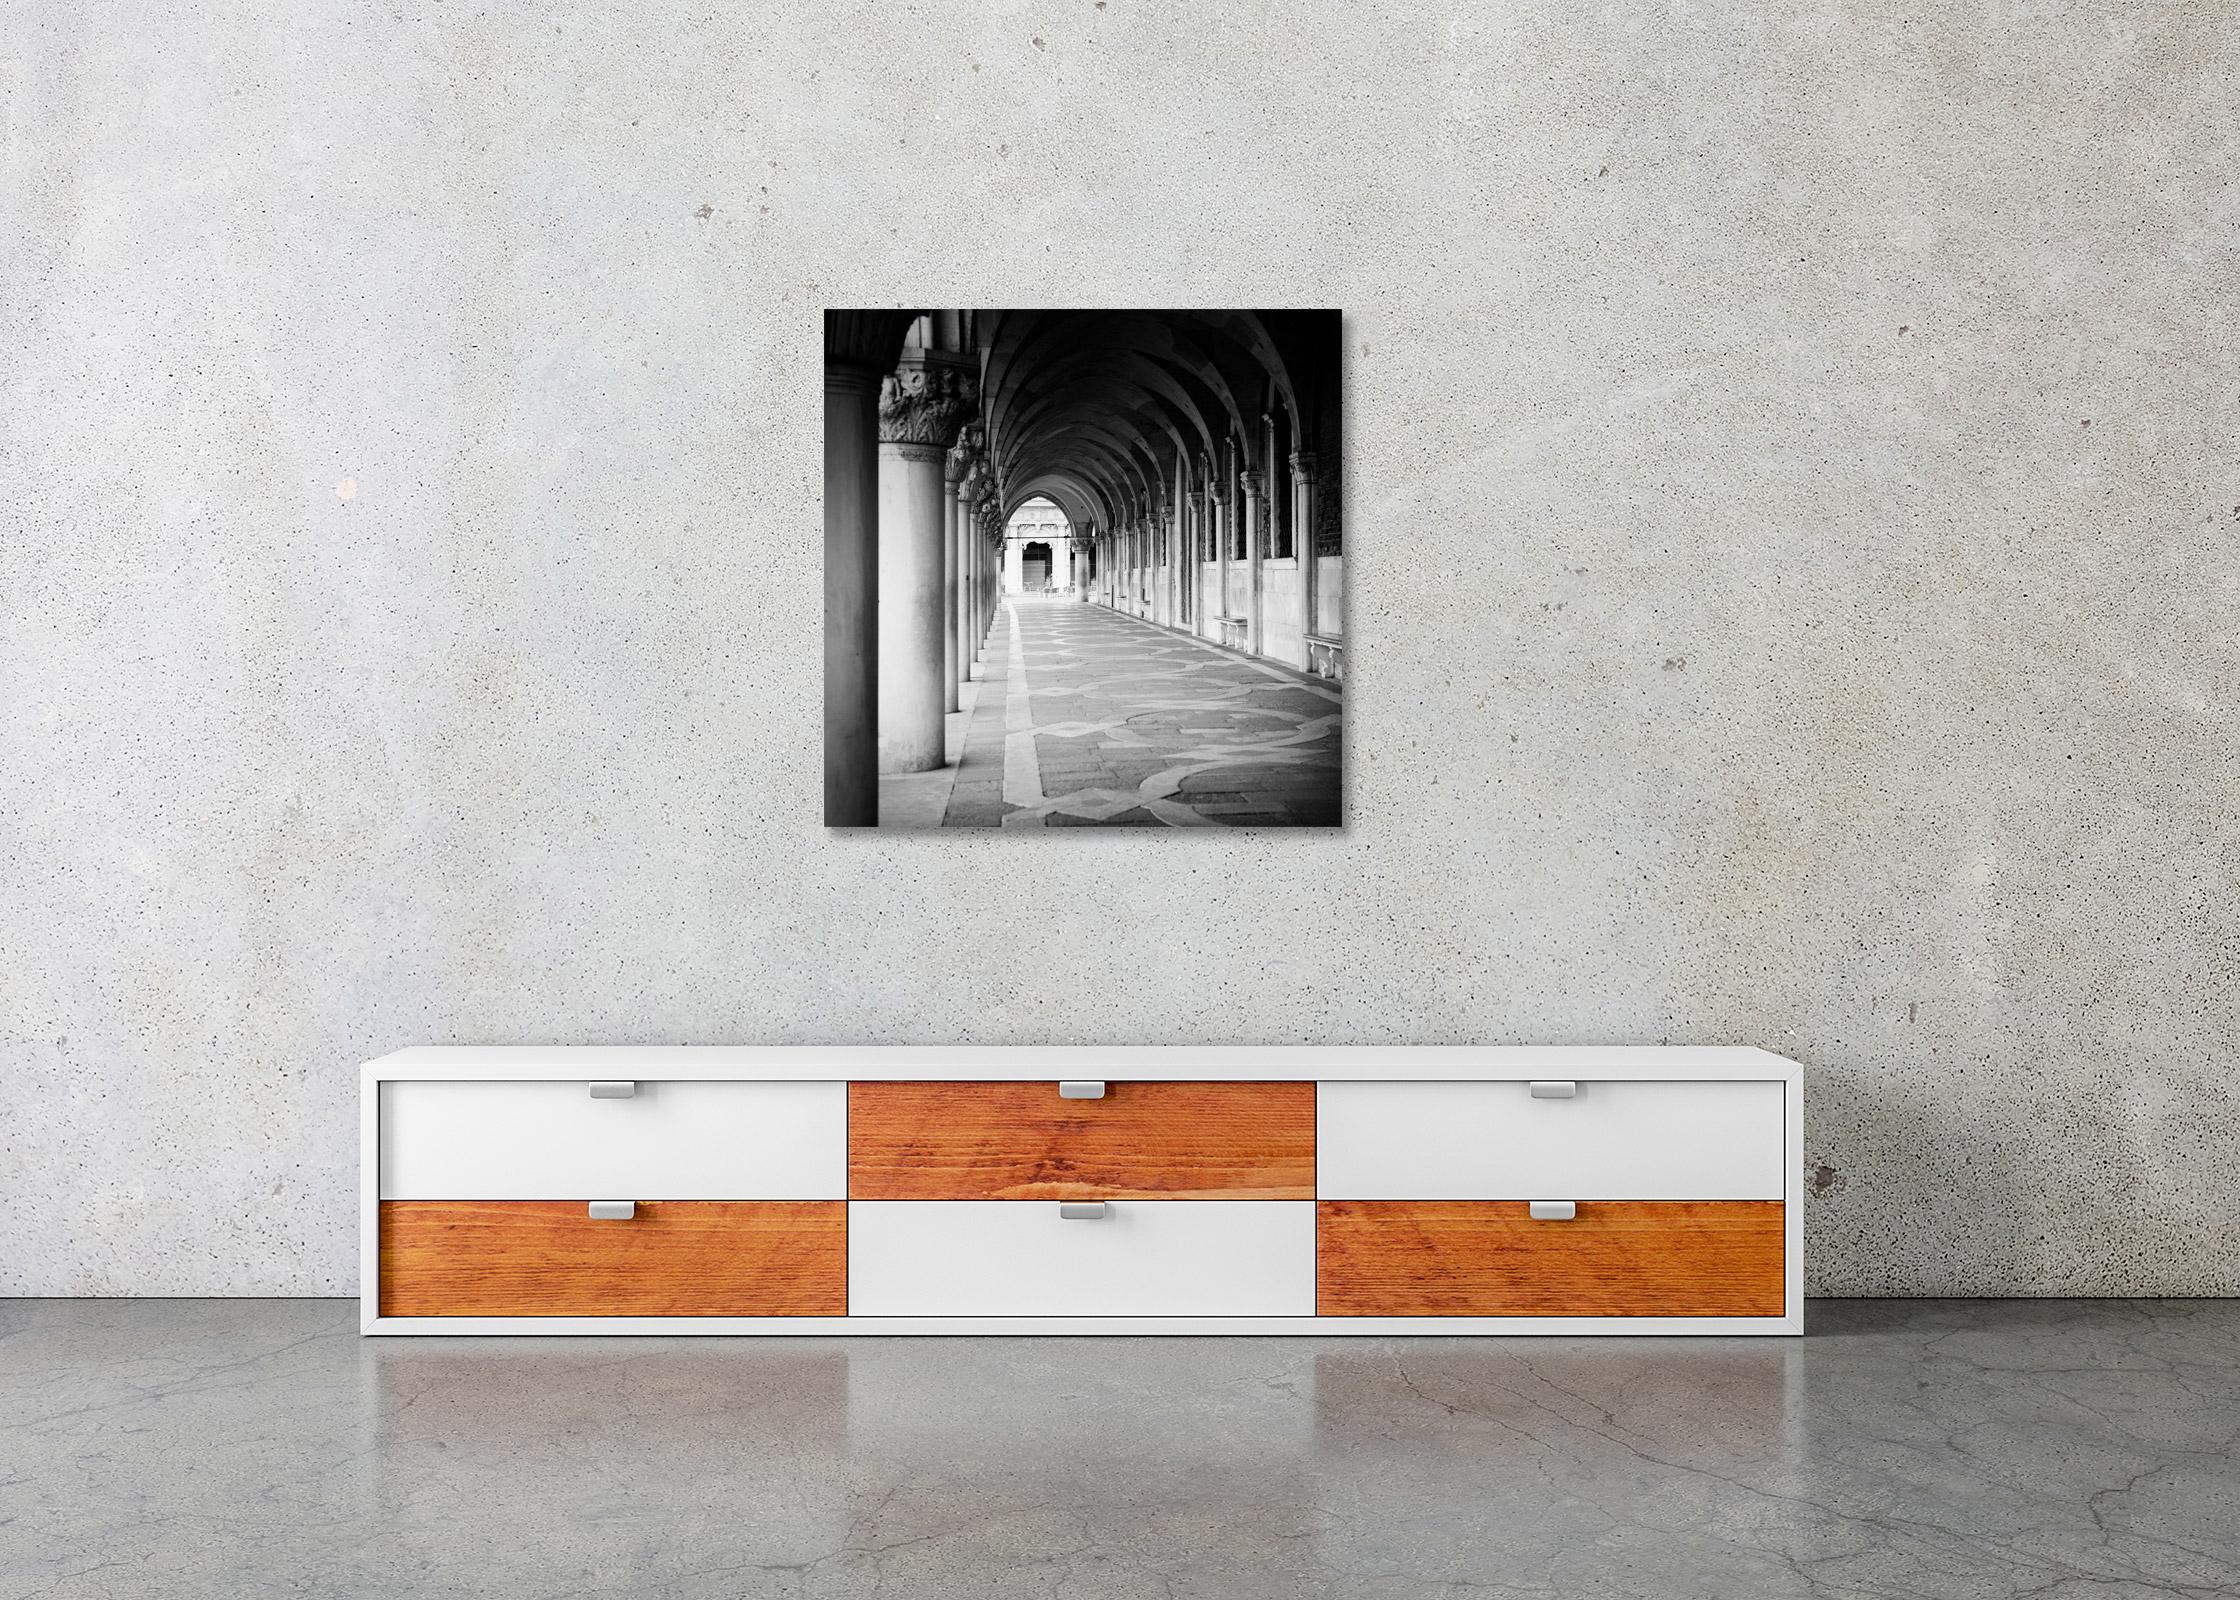 Doges Palace Arcade, Venice, Italy, black and white photography, art cityscape - Gray Landscape Photograph by Gerald Berghammer